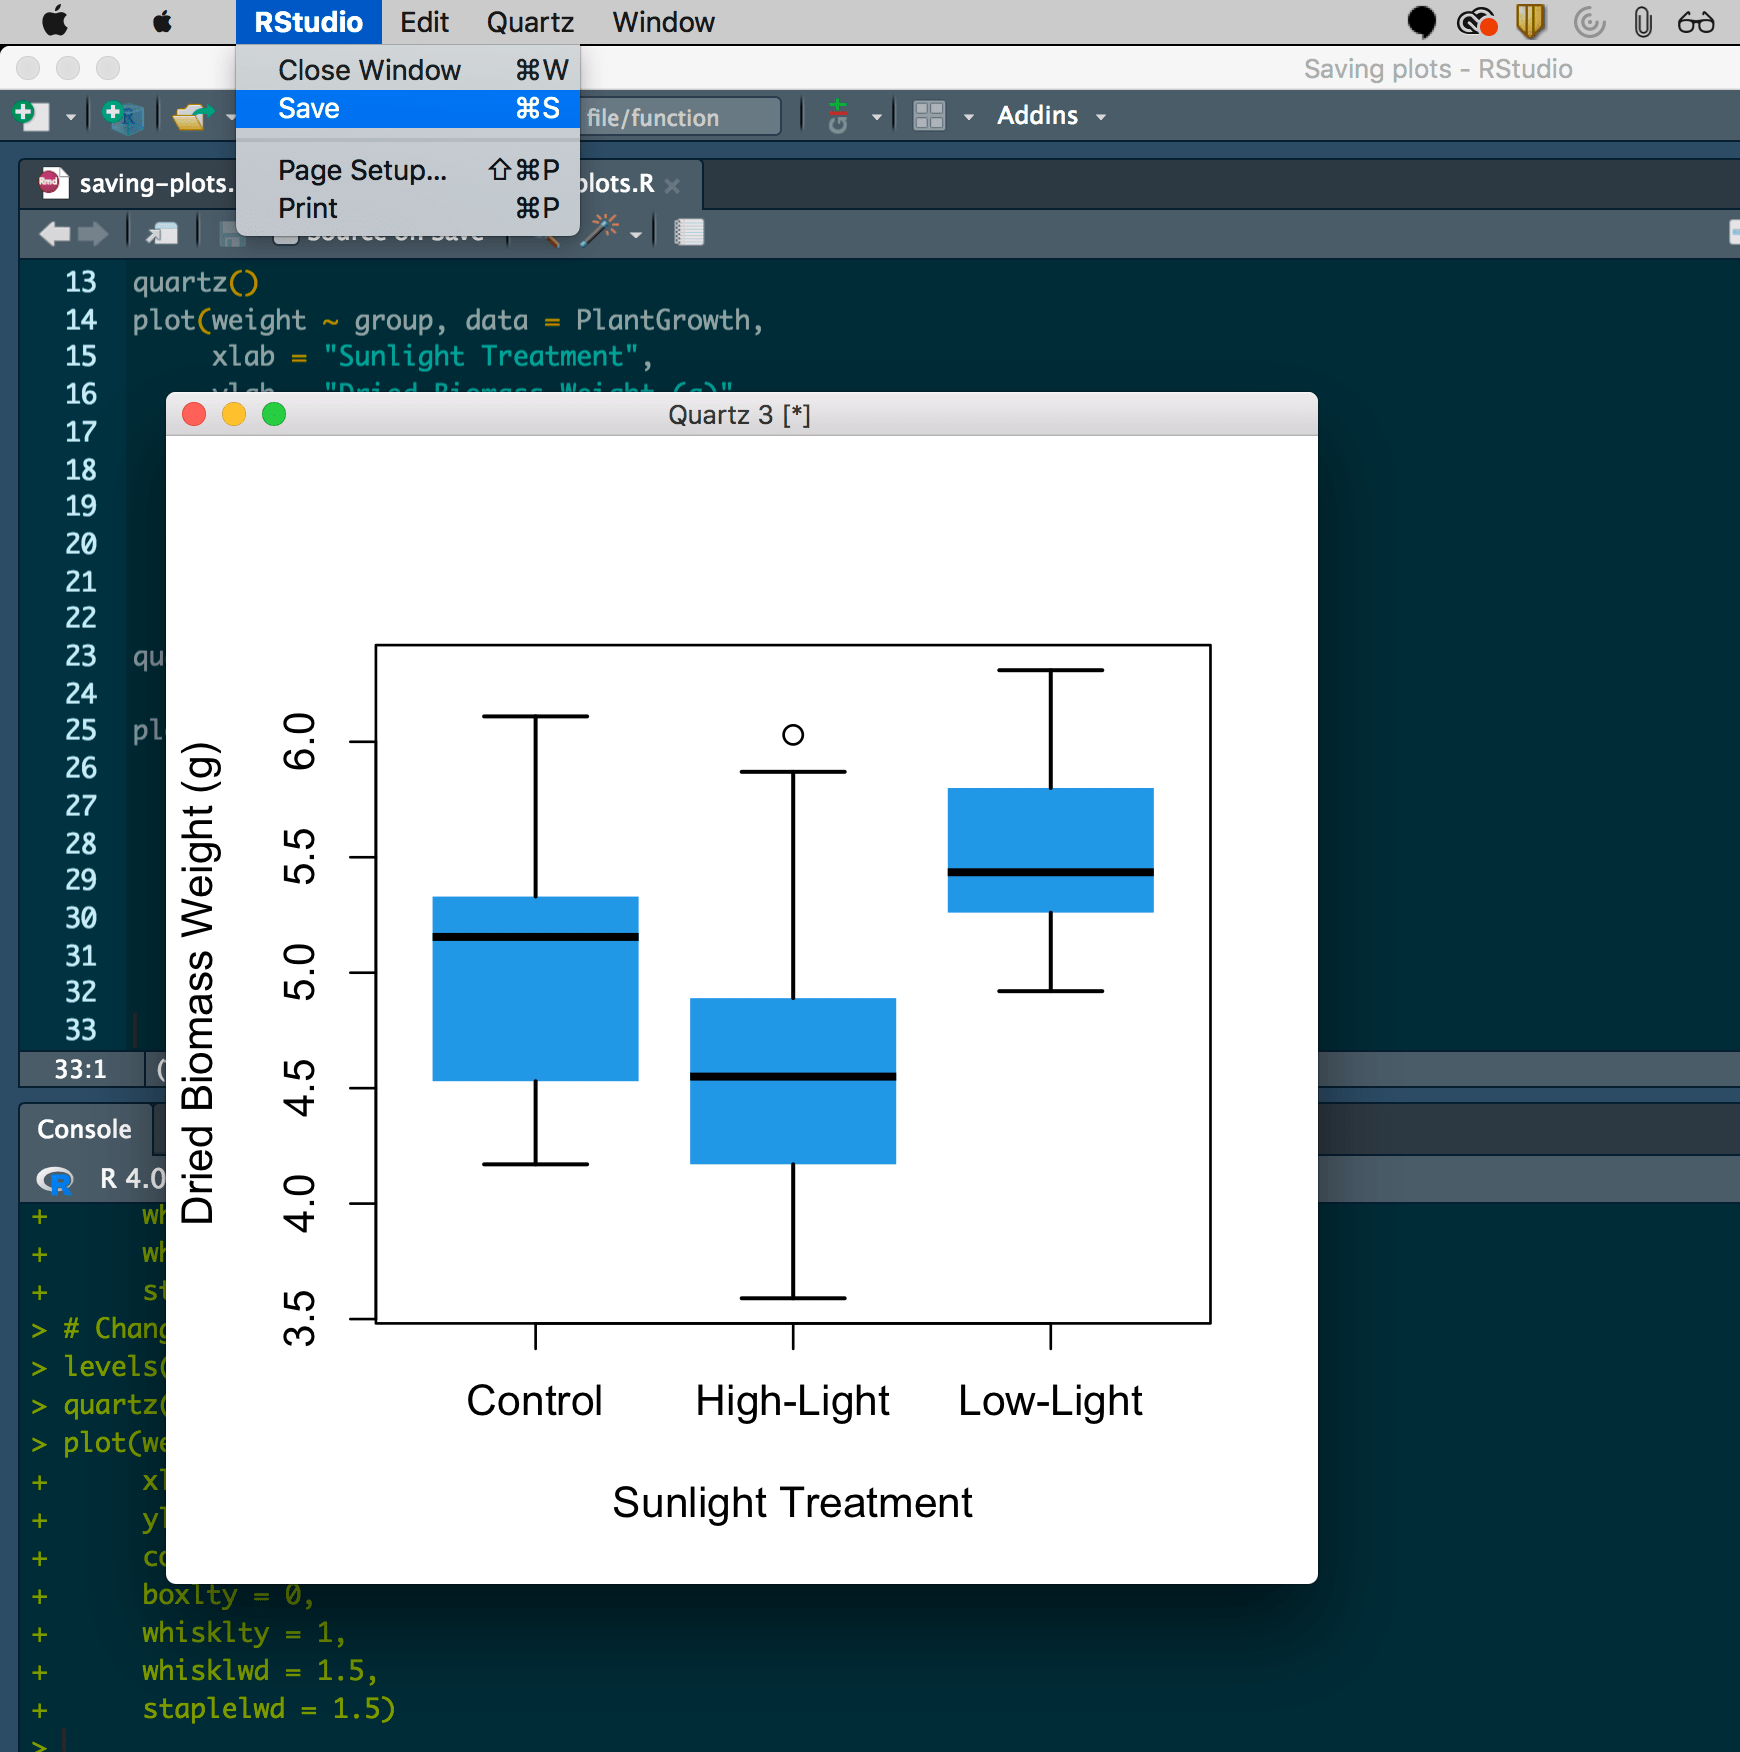 Image showing an appropriately-sized figure with the cursor over the RStudio menu tab and the Save button